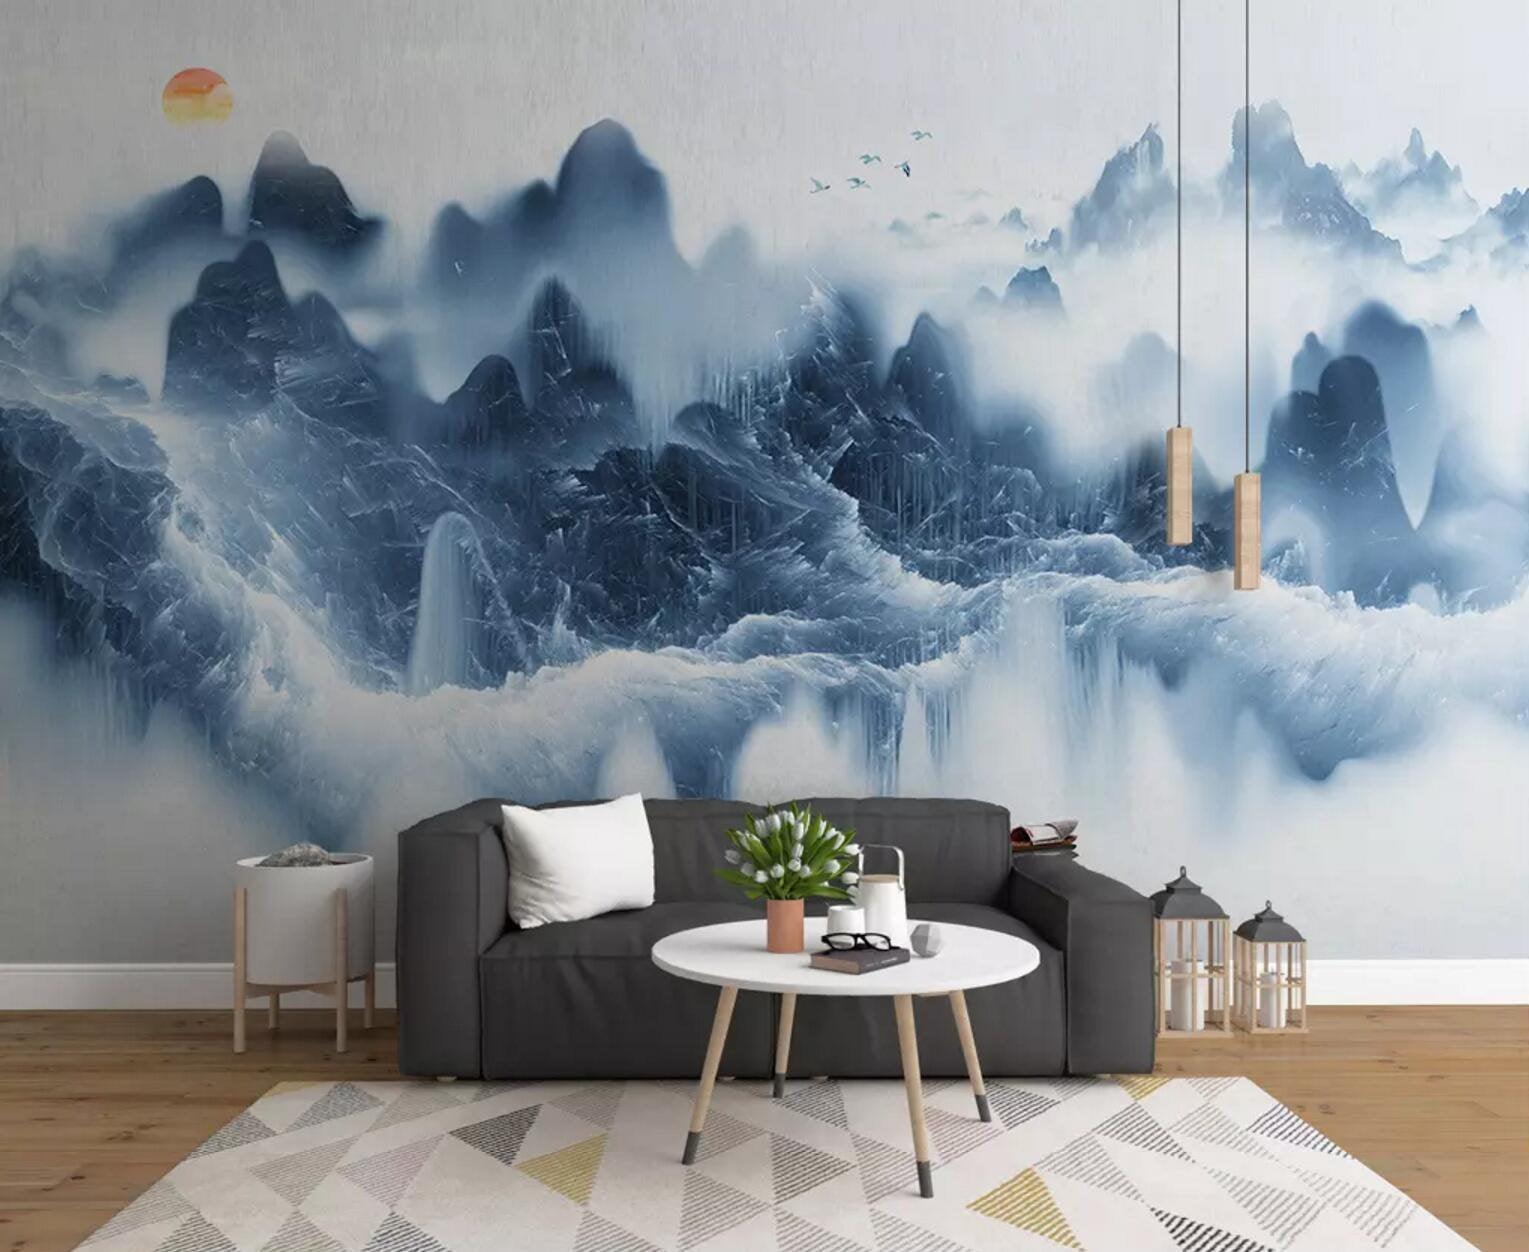 3D Chinese style,Abstract,Ink painting,Landscape painting Wallpaper, Removable Self Adhesive Wallpaper,Wall Mural,Vintage art,Peel and Stick- Jess Art Decoration